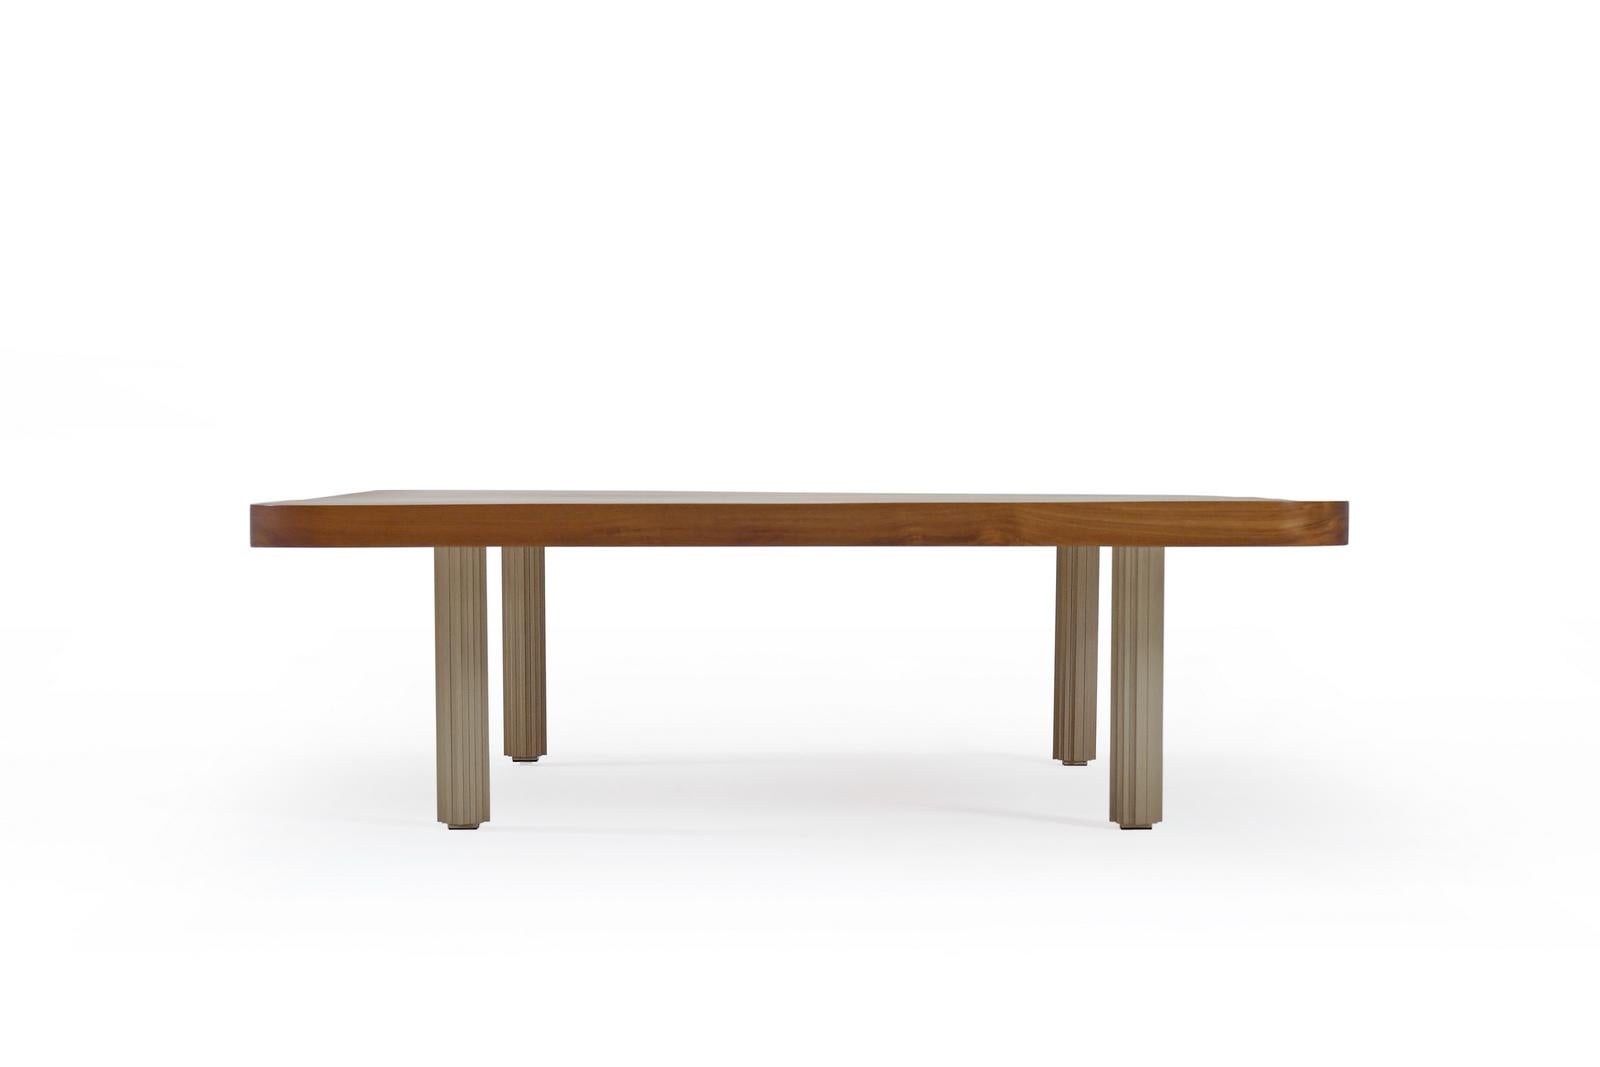 We created this low table as a center piece for a client’s outdoor lounging area where . The corners have been rounded to improve not only the aesthetic but also soften the edge. The 4.5cm thick reclaimed Teak wood is on our newly developed brass